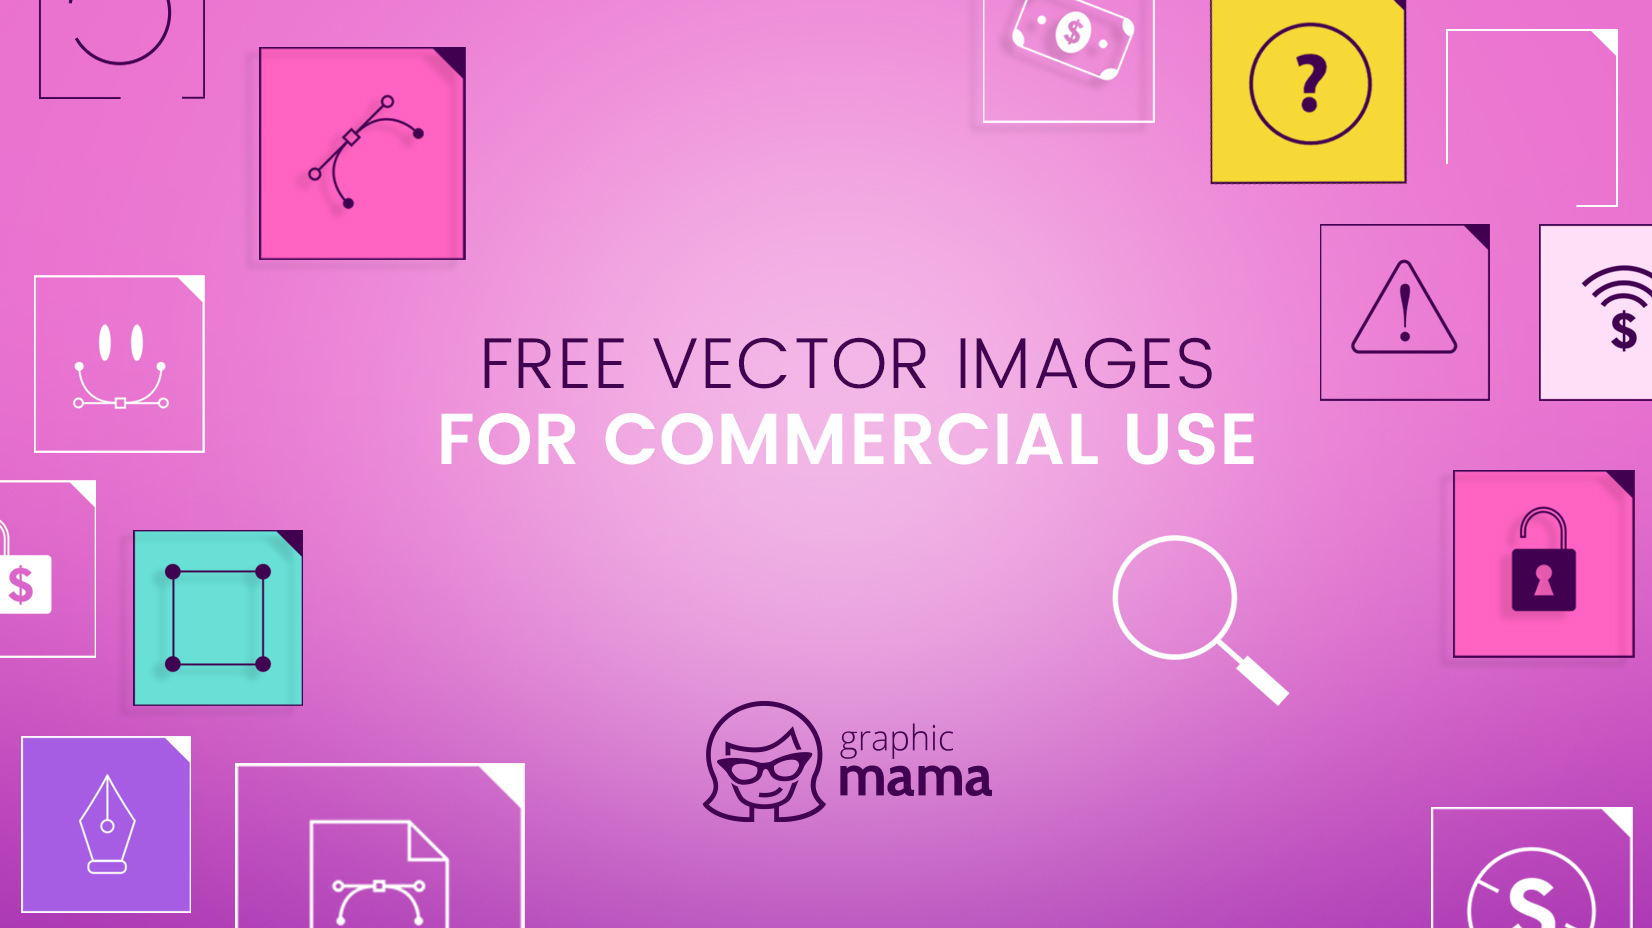 Where to Find Free Vector Images for Commercial Use.